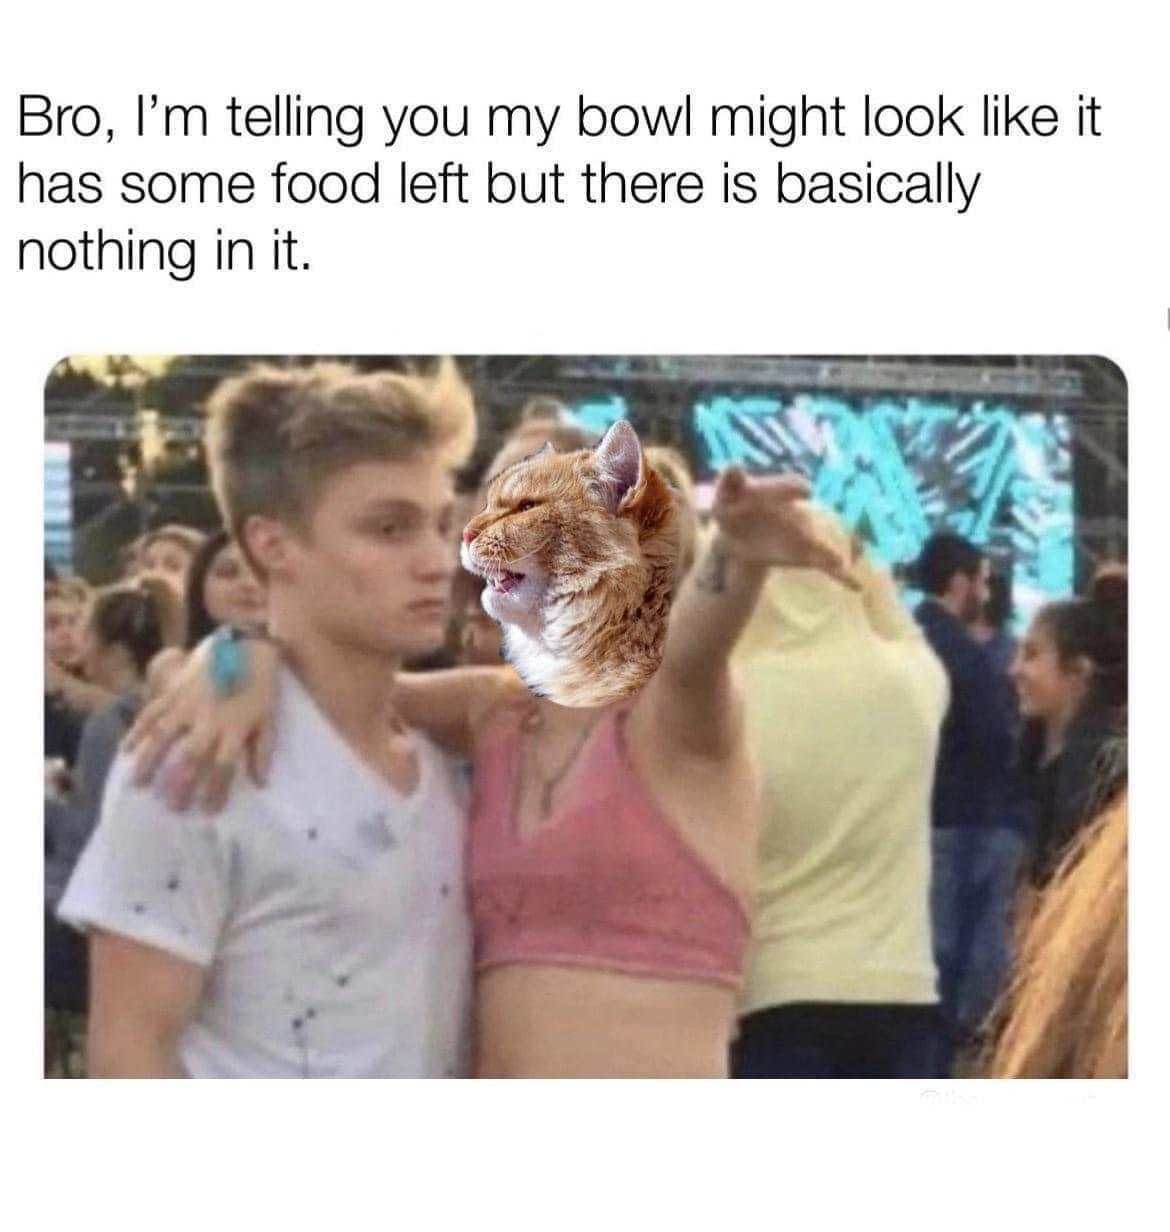 fresh memes - Food - Bro, I'm telling you my bowl might look it has some food left but there is basically nothing in it.